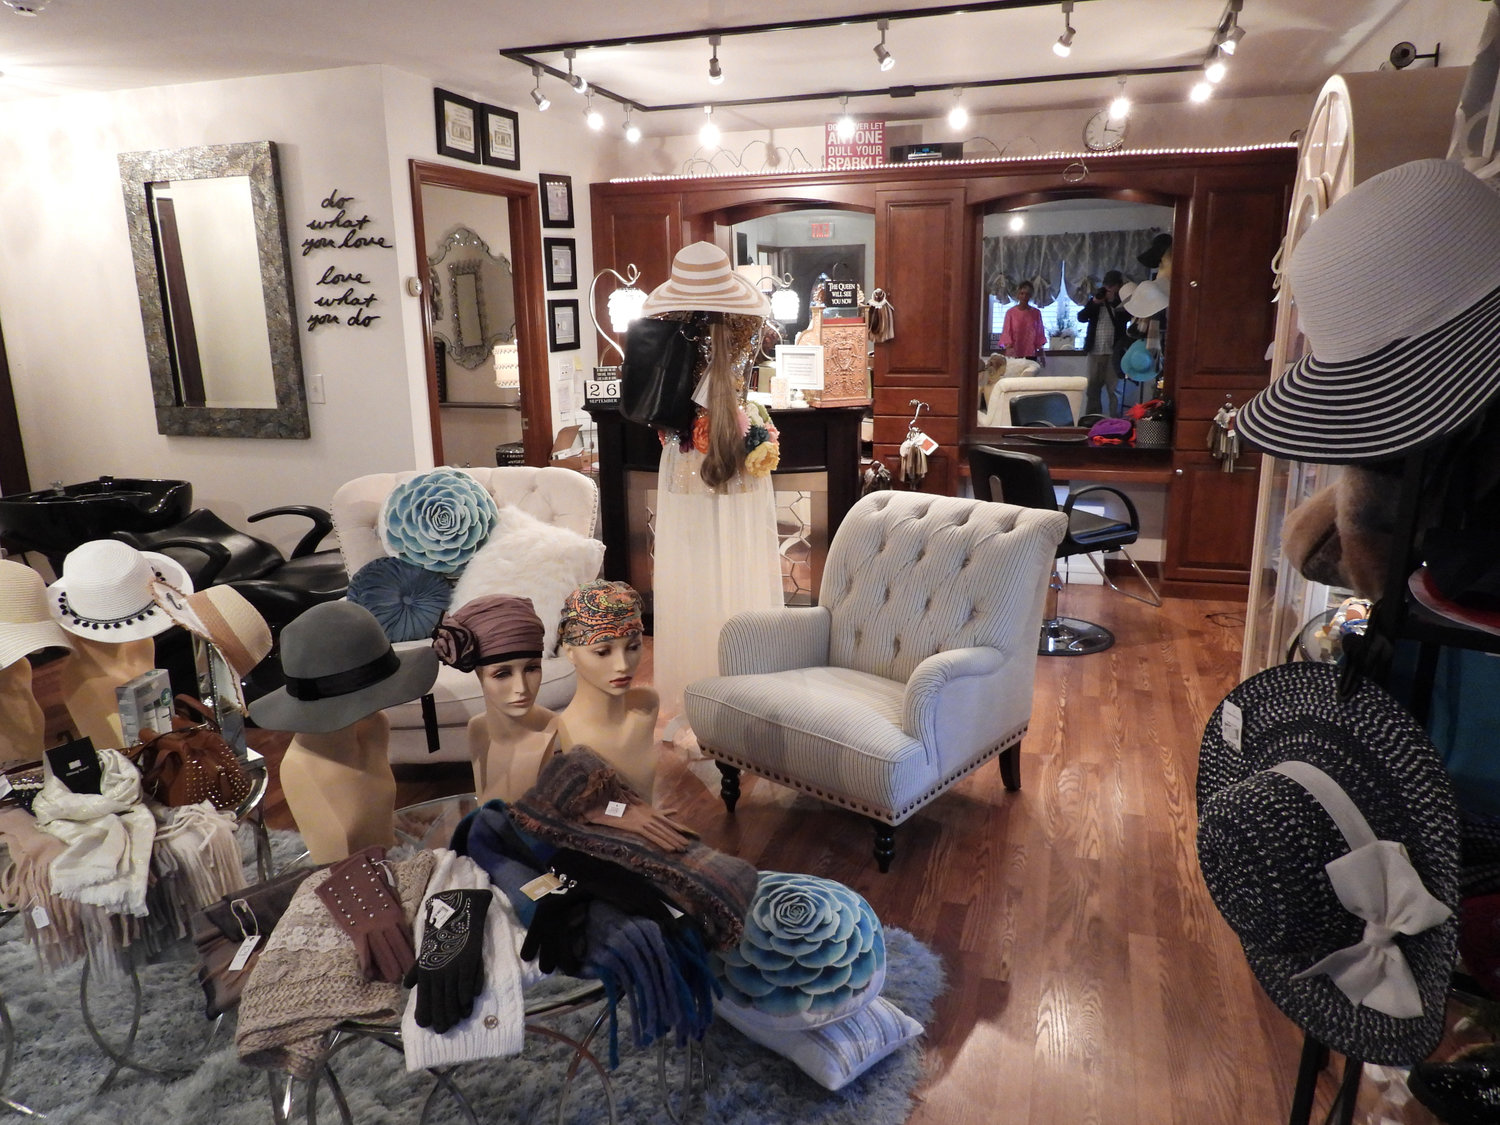 The Wig Gallery in Rome was built by owner Lori Smith to be a comforting environment for her clients.